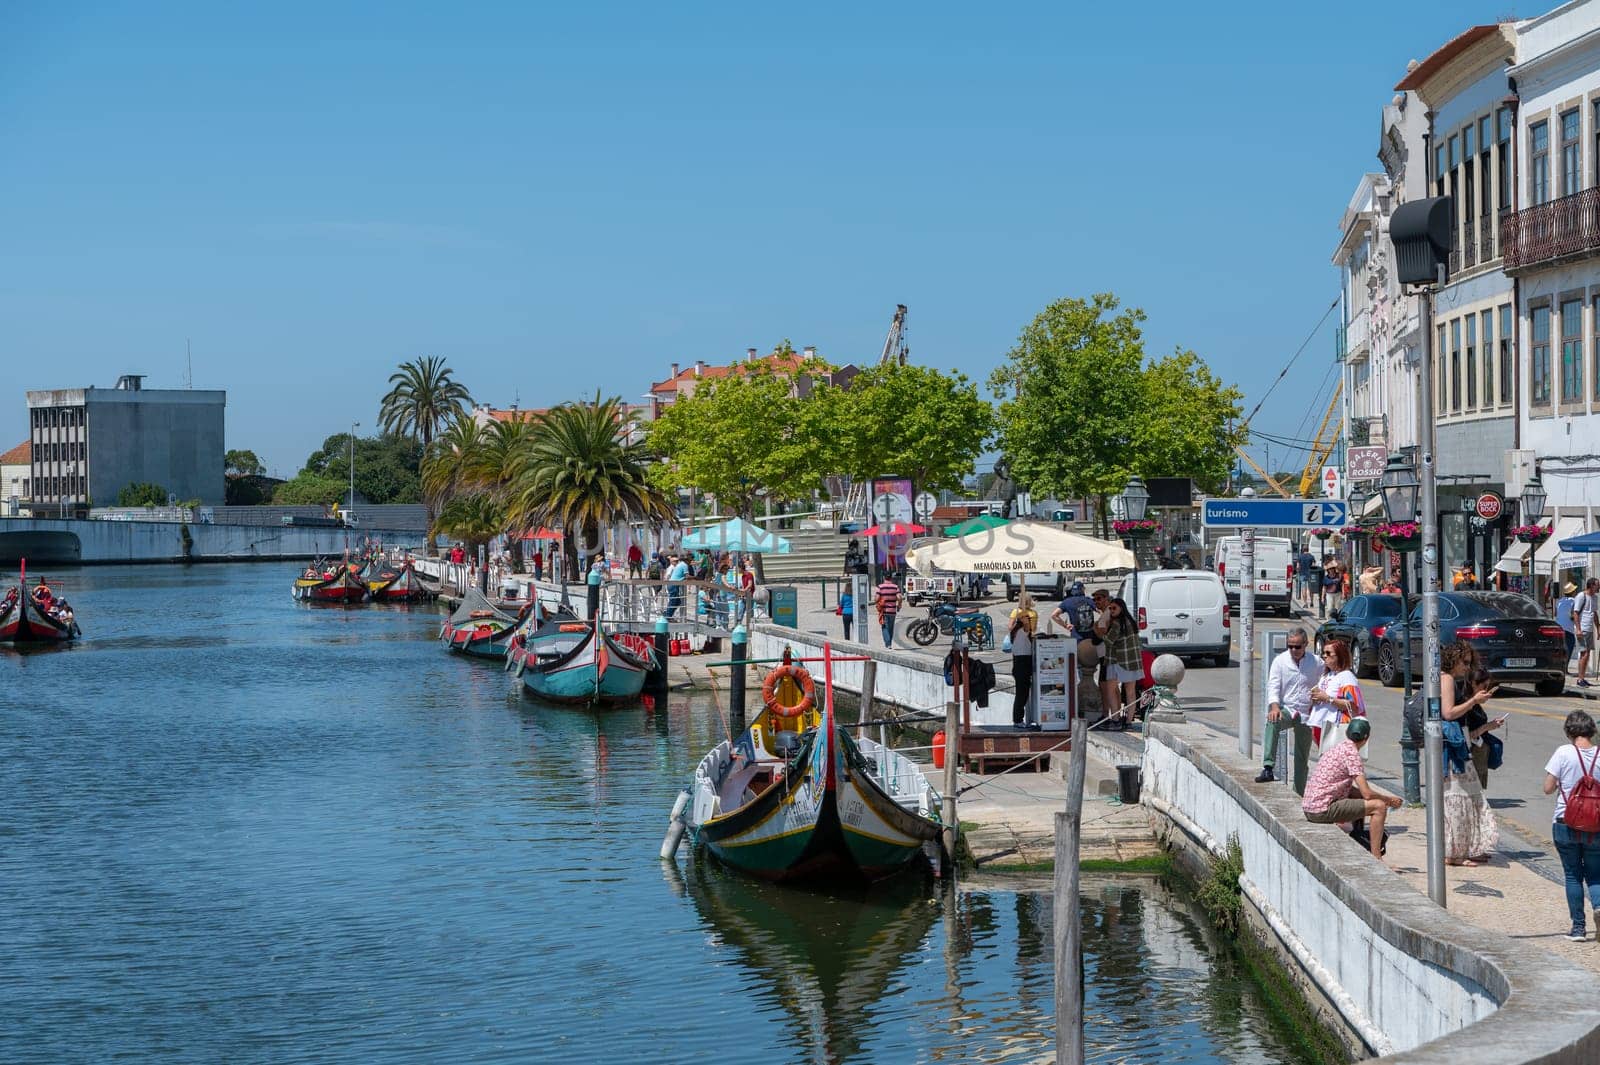 Traditional boats in the canal of Aveiro, Portugal. The colorful Moliceiro de Aveiro boat tours are popular with tourists to enjoy views of the charming canals. Aveiro, Portugal. by martinscphoto